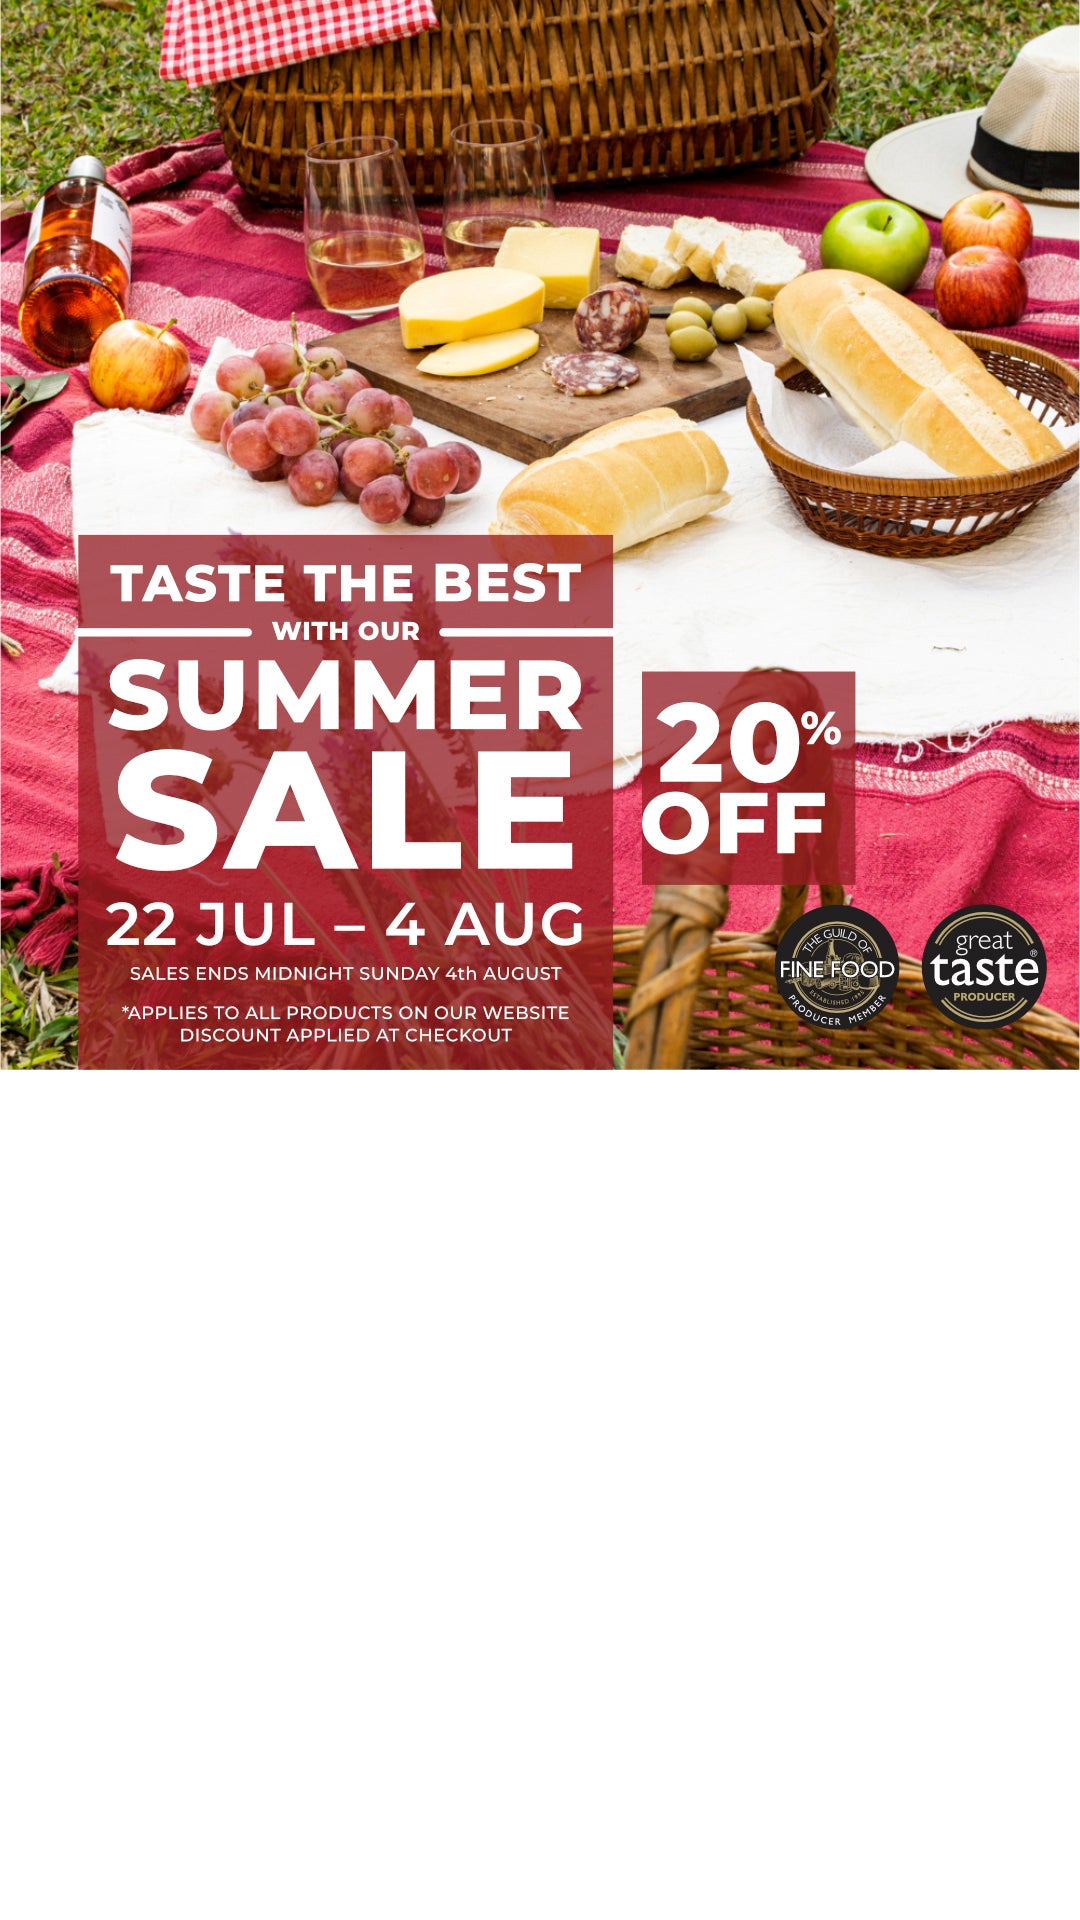 Taste the best with our Summer Sale with 20% off, 22 July to 4 August writtne on an image with picnic basket and food.